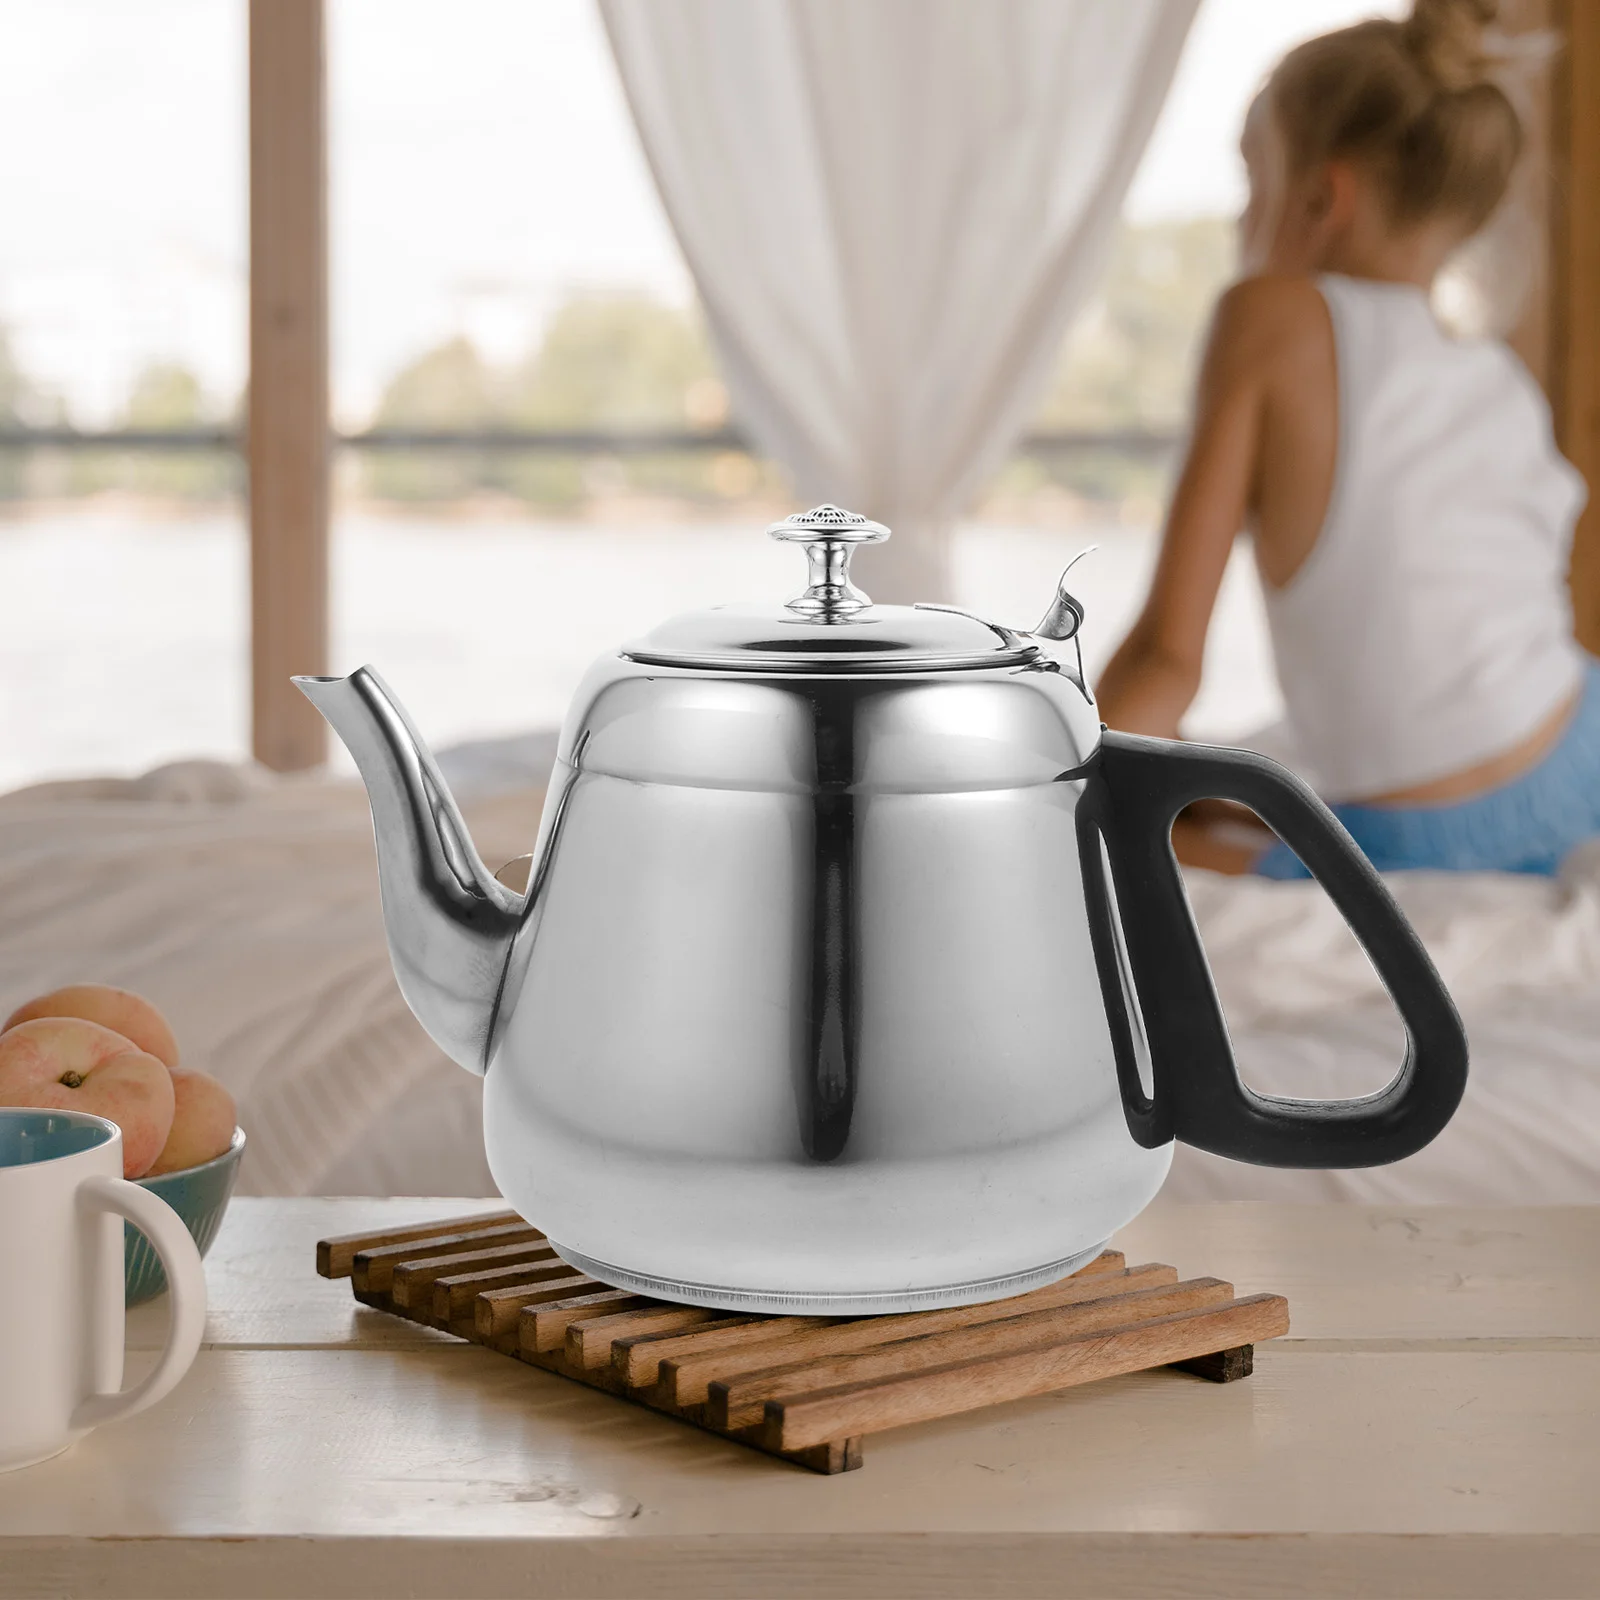 

Stainless Steel Tea Pot with Strainer Teapot Infuser Tea Kettle Teaware Water Kettle for Home